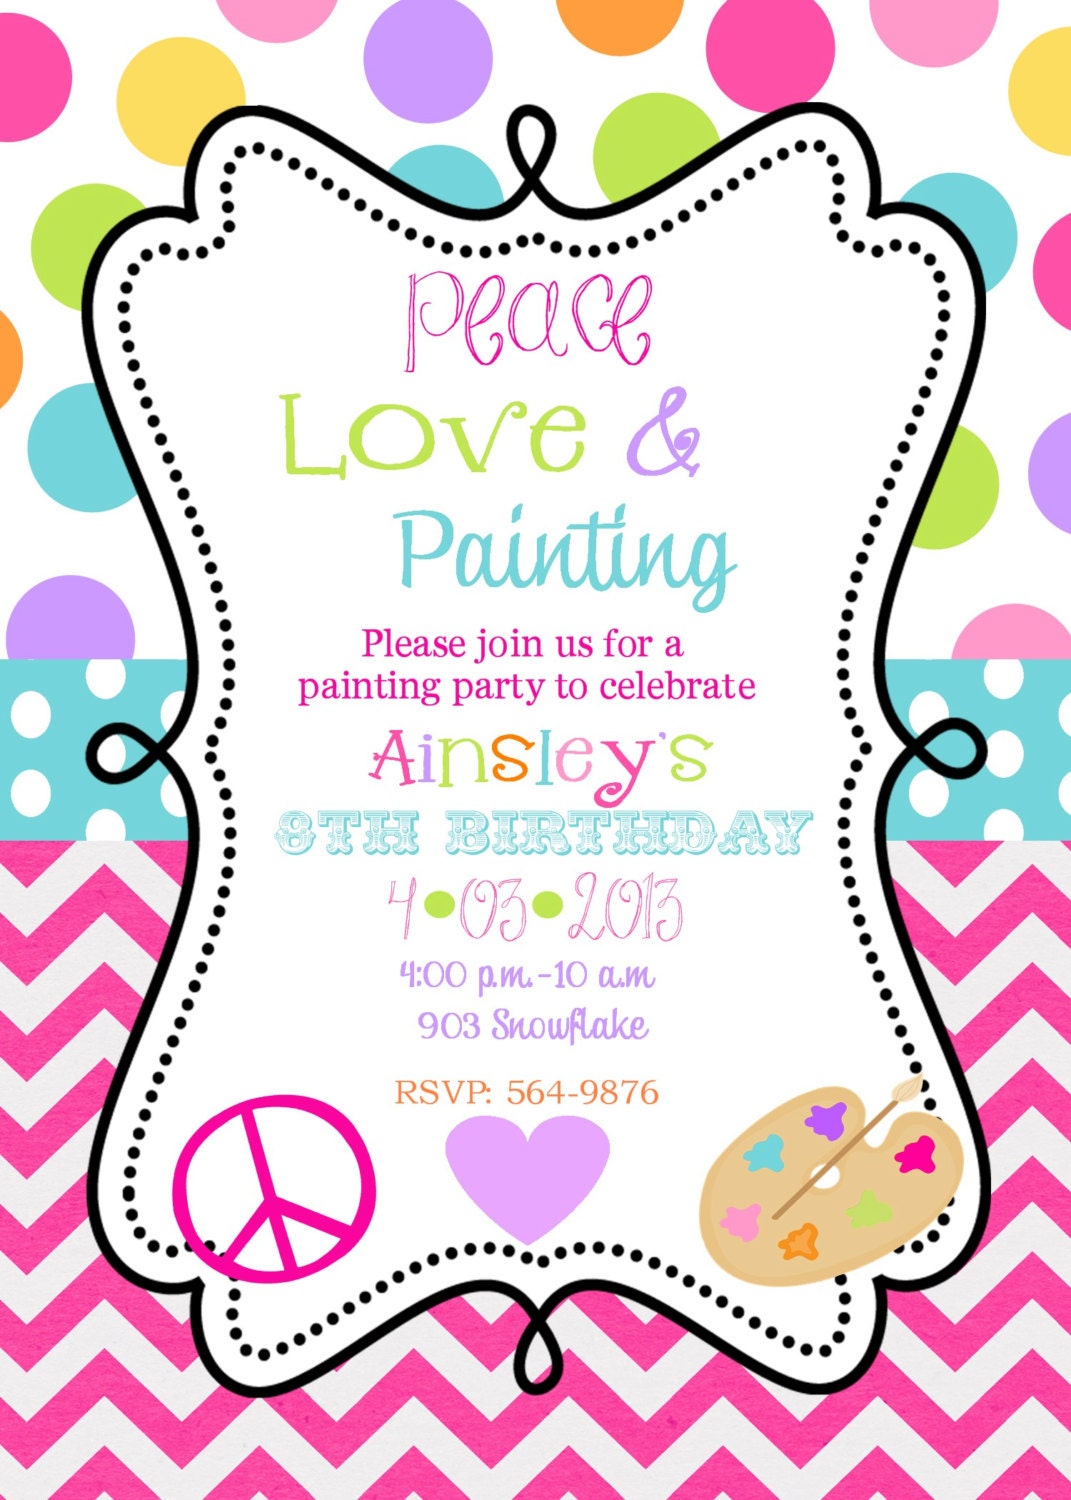 Peace Love Painting  Birthday Party Invitations, Art party printable or digital file